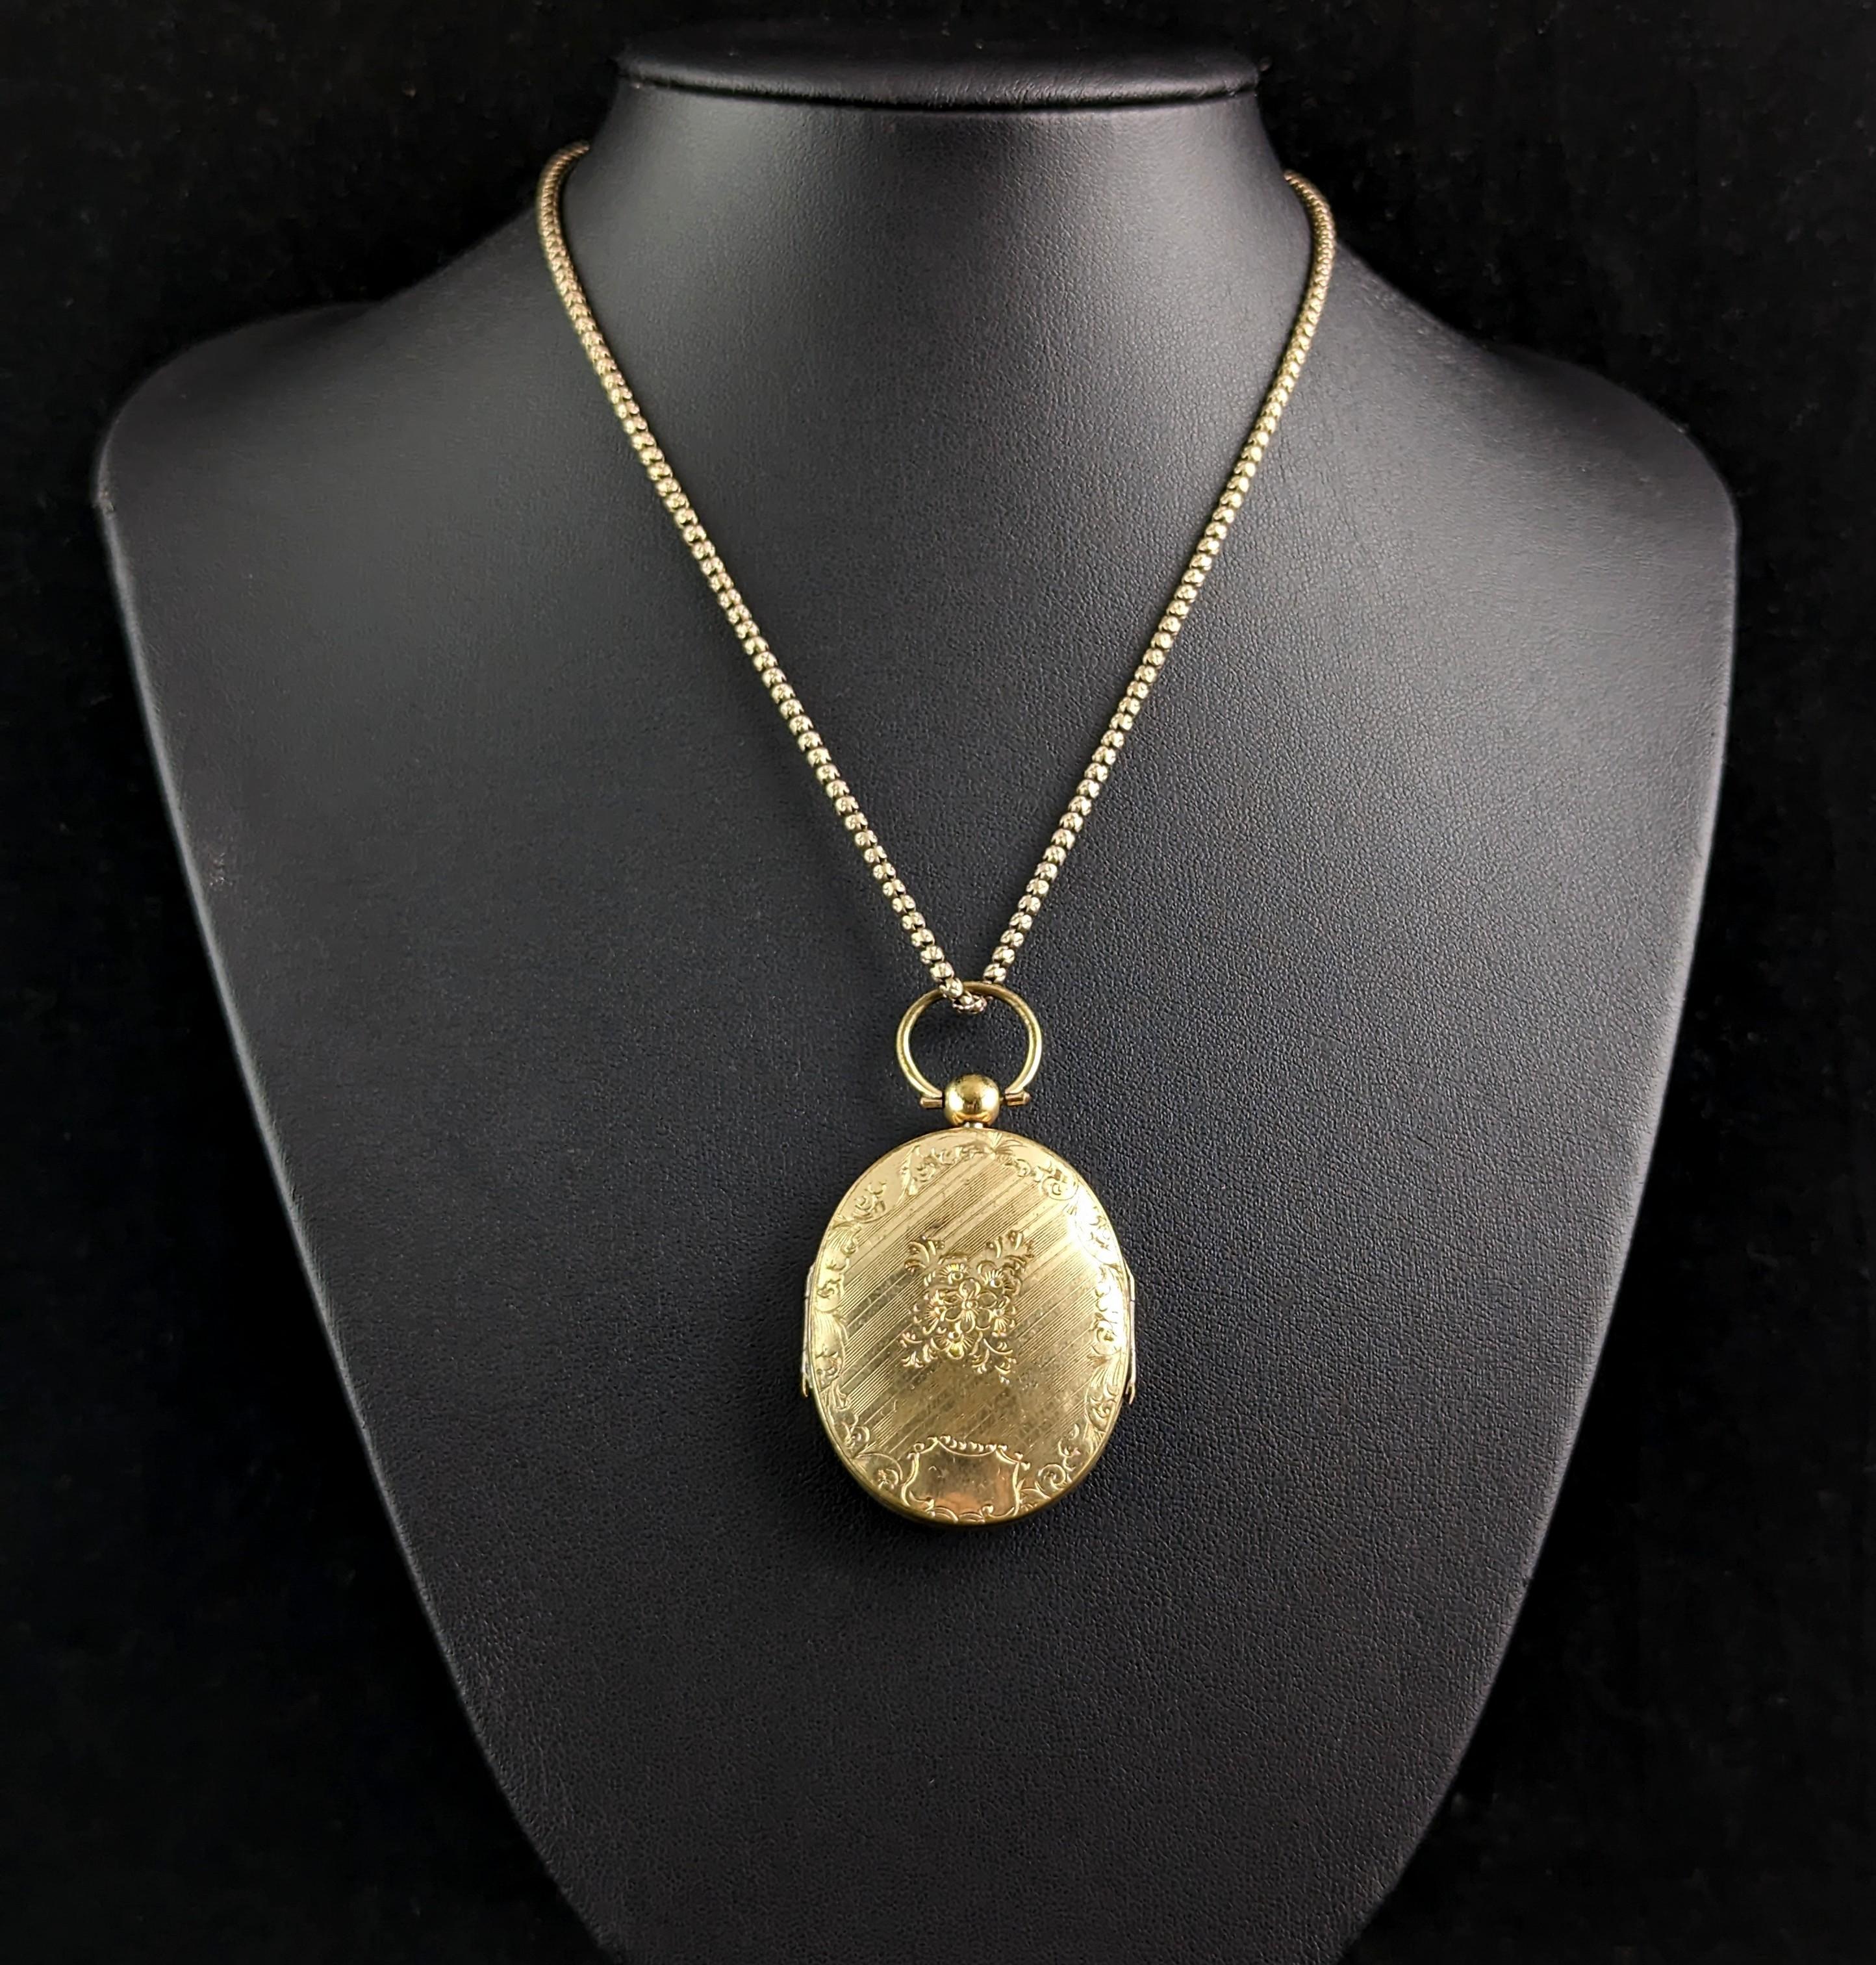 A rare and tragically beautiful antique Victorian era mourning locket necklace.

The locket is a large size, elaborately designed in a rich golden gilt metal, it has a floral design engraving to the front and back and is a double sided locket